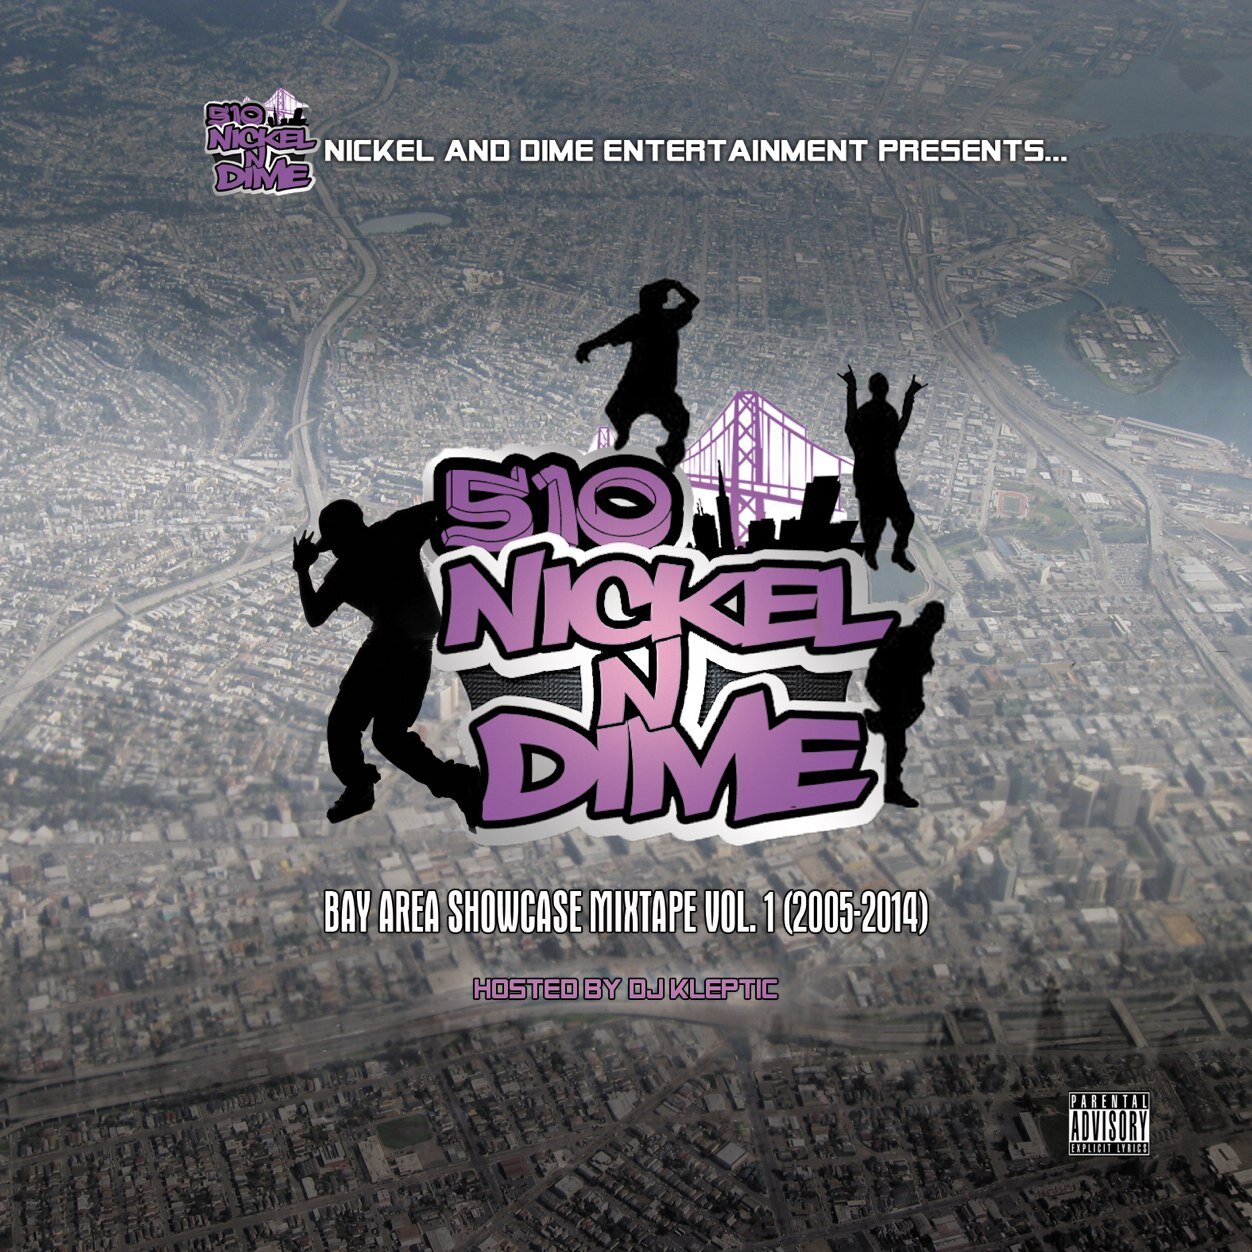 Nickel and Dime ENT.